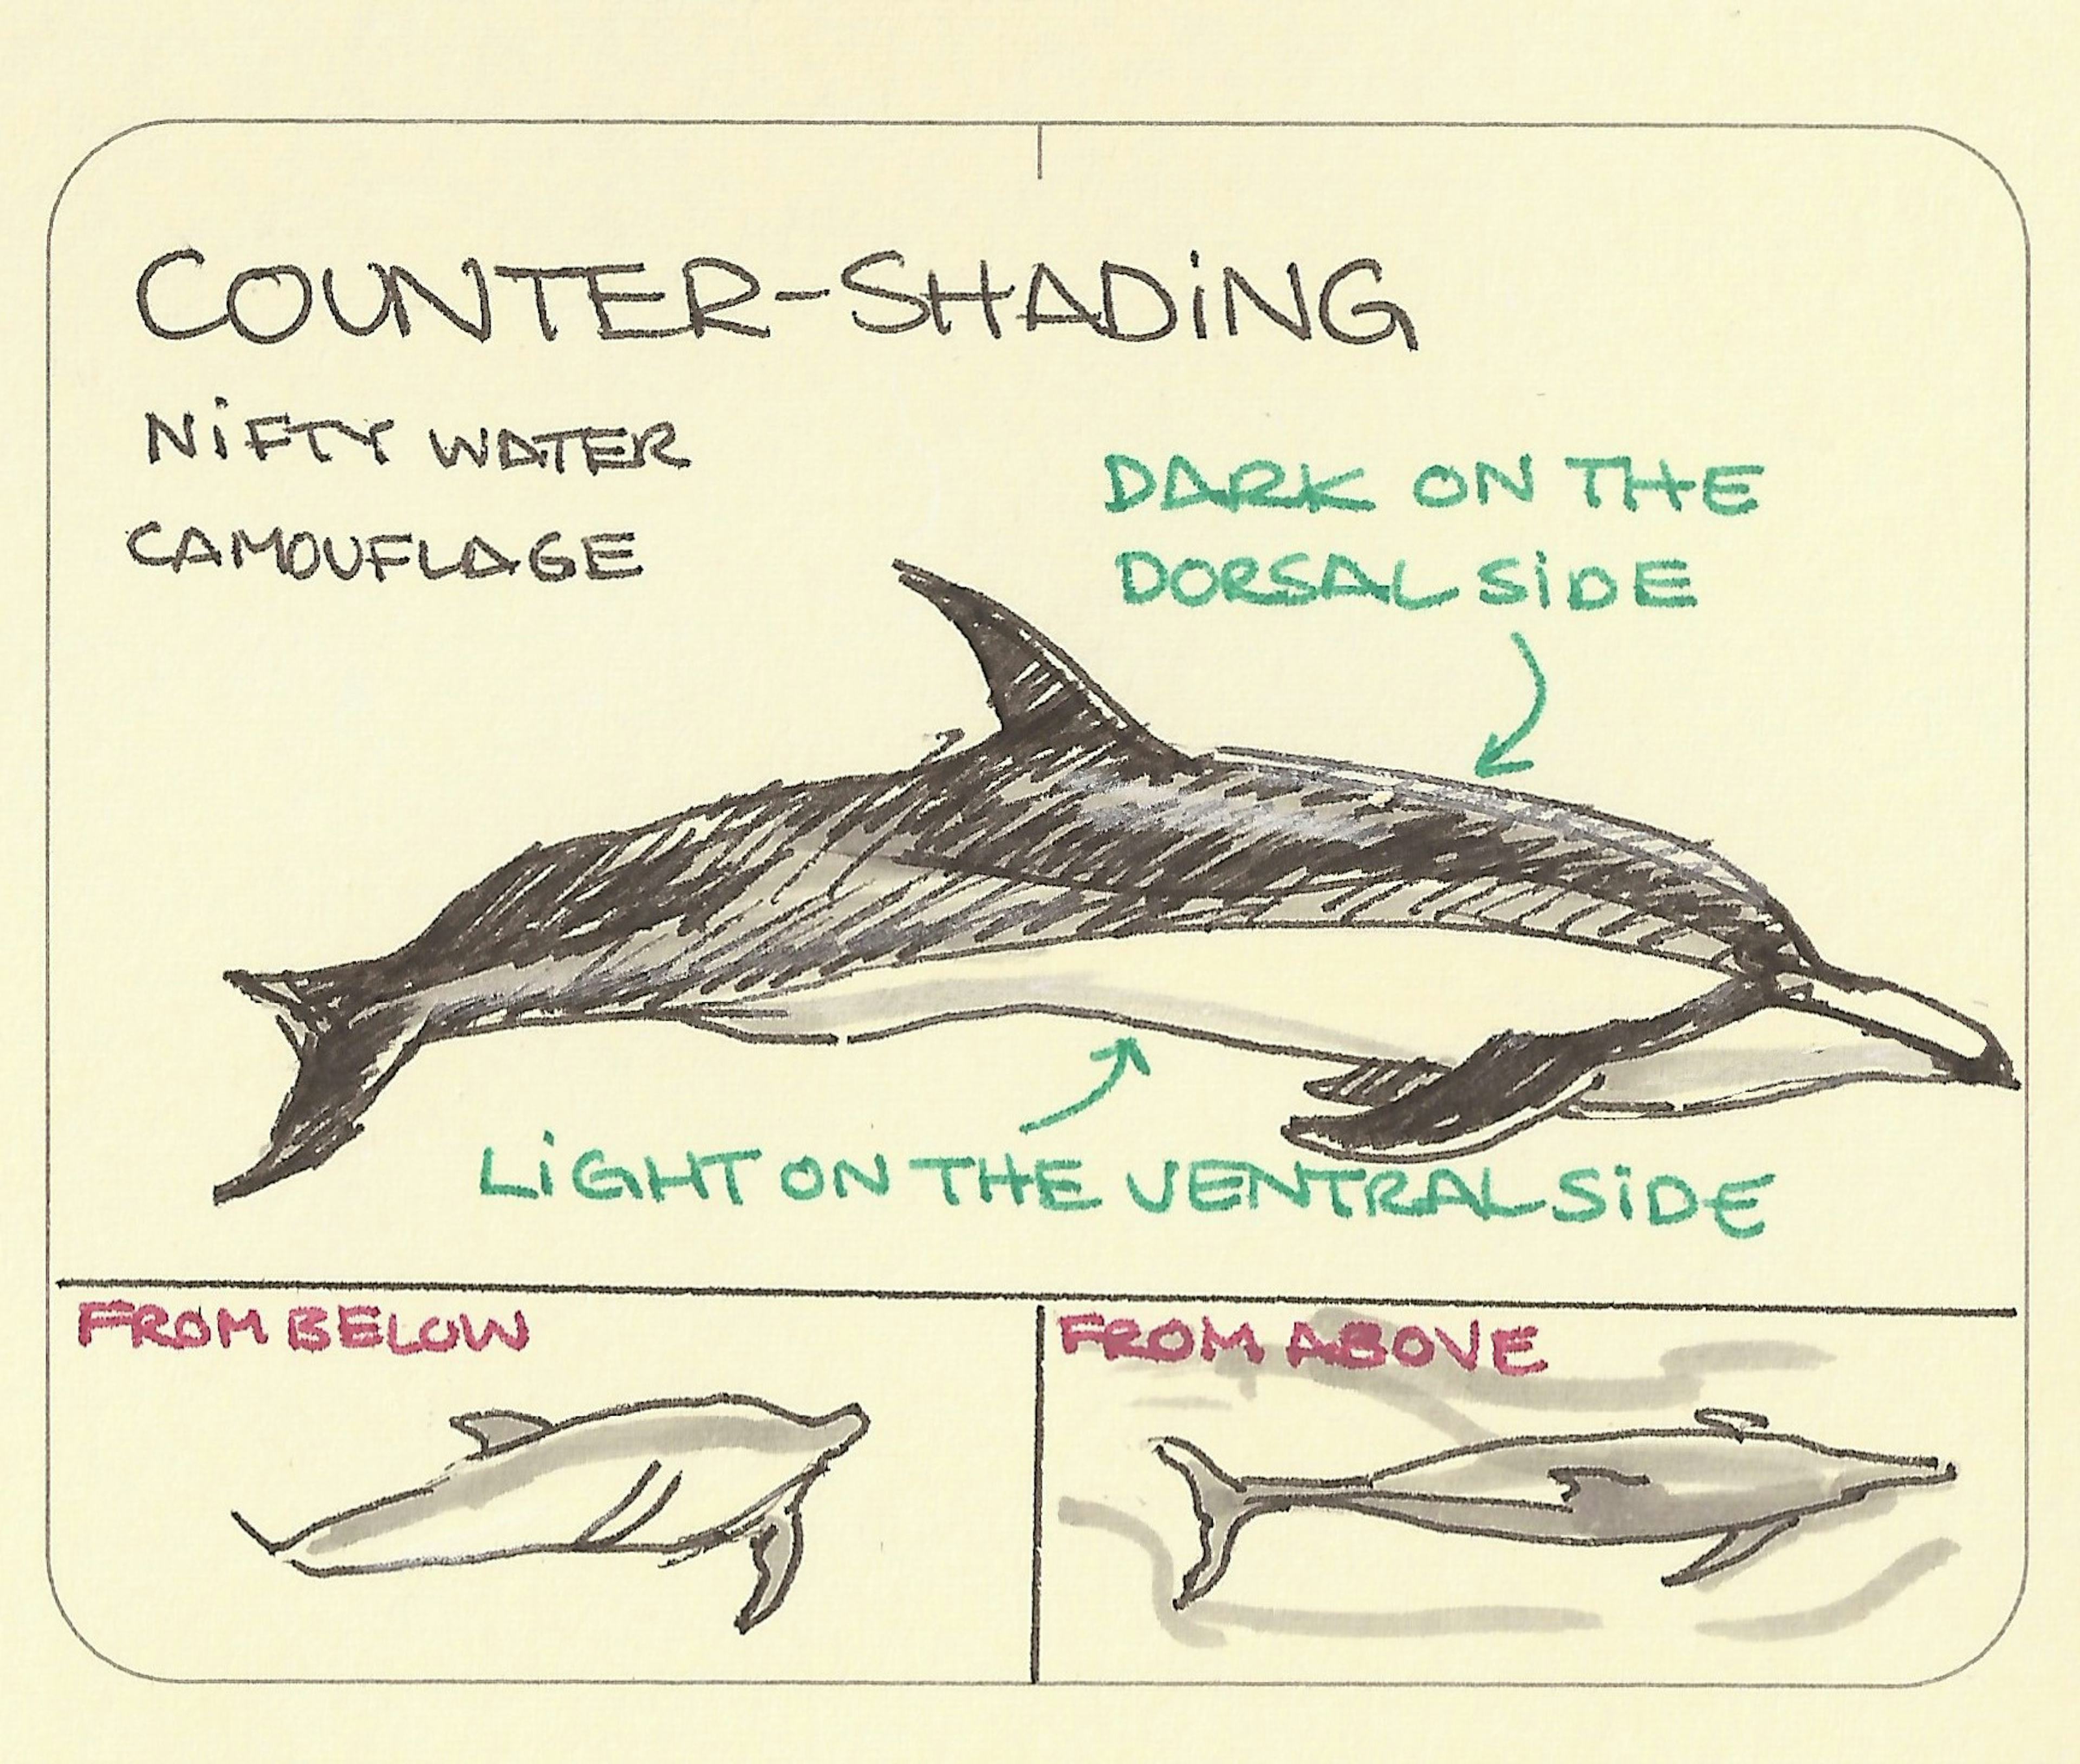 Counter-shading: Nifty water camouflage practiced by dolphins, porpoises, some fish and other neat sea creatures. The simple strategy: look light like the sky for anyone below, and look dark like the sea for anyone above.